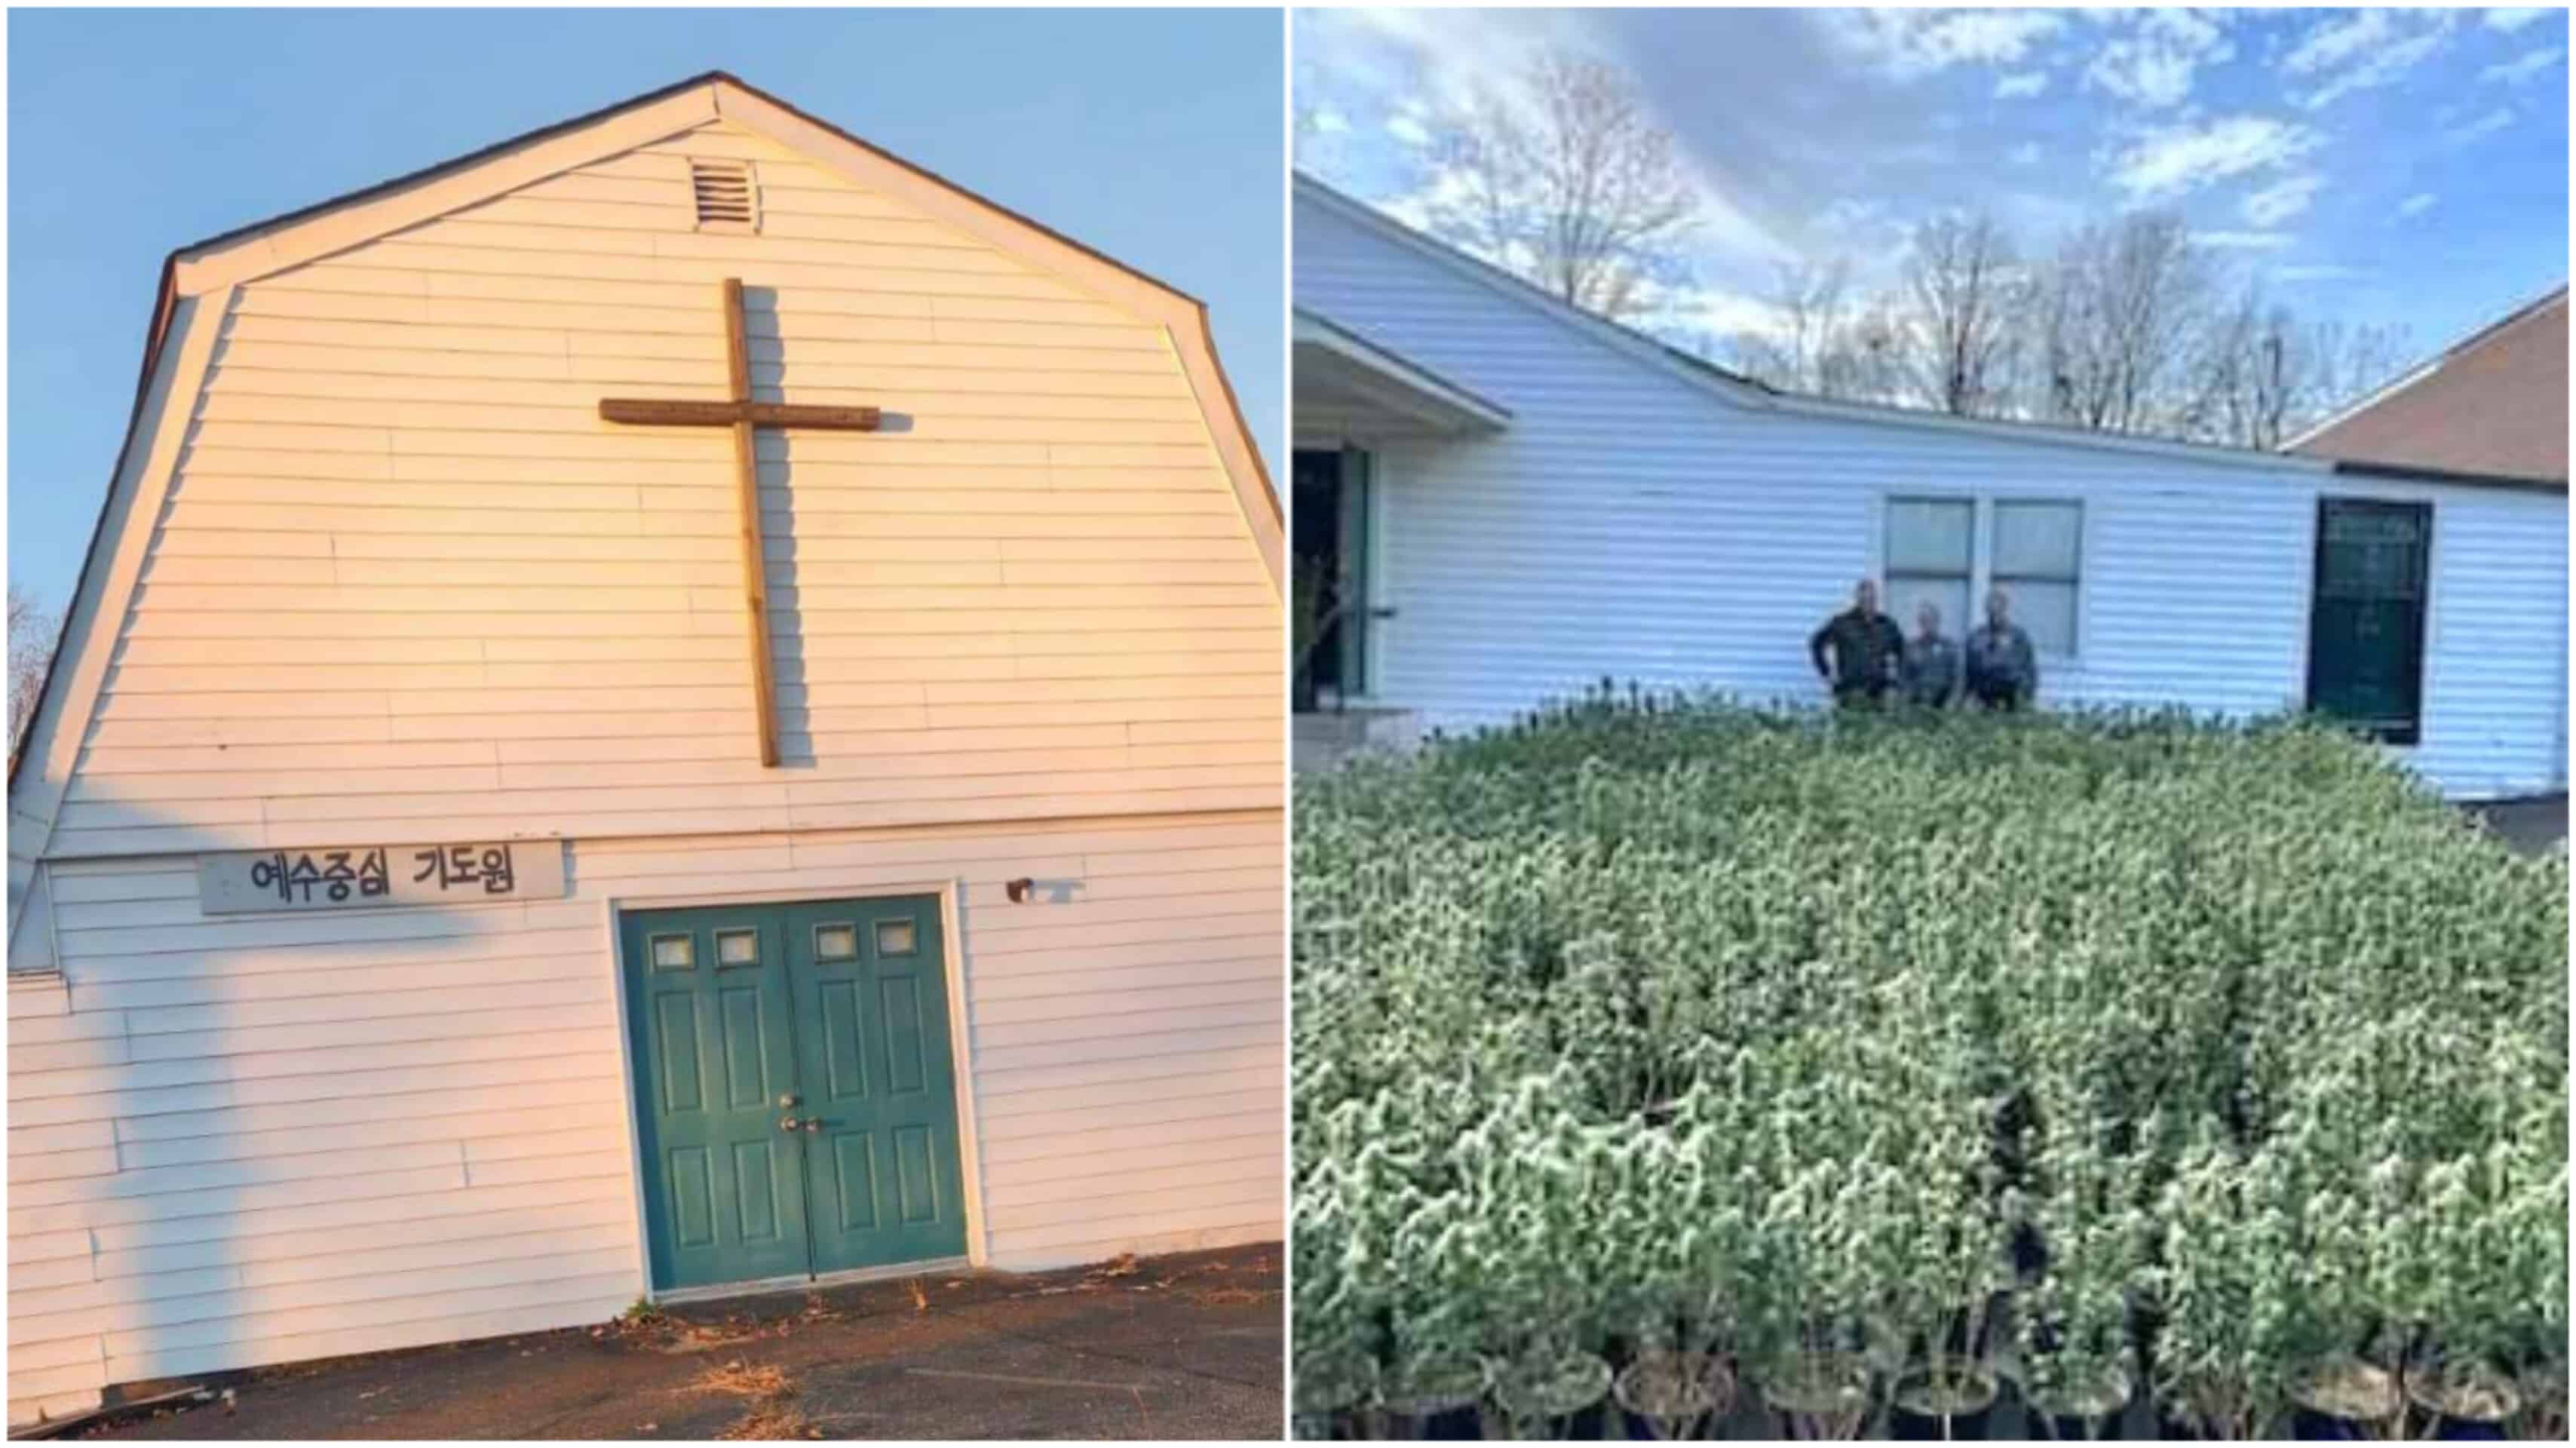 Tennessee Authorities Find Weed Cultivation Site Inside Church